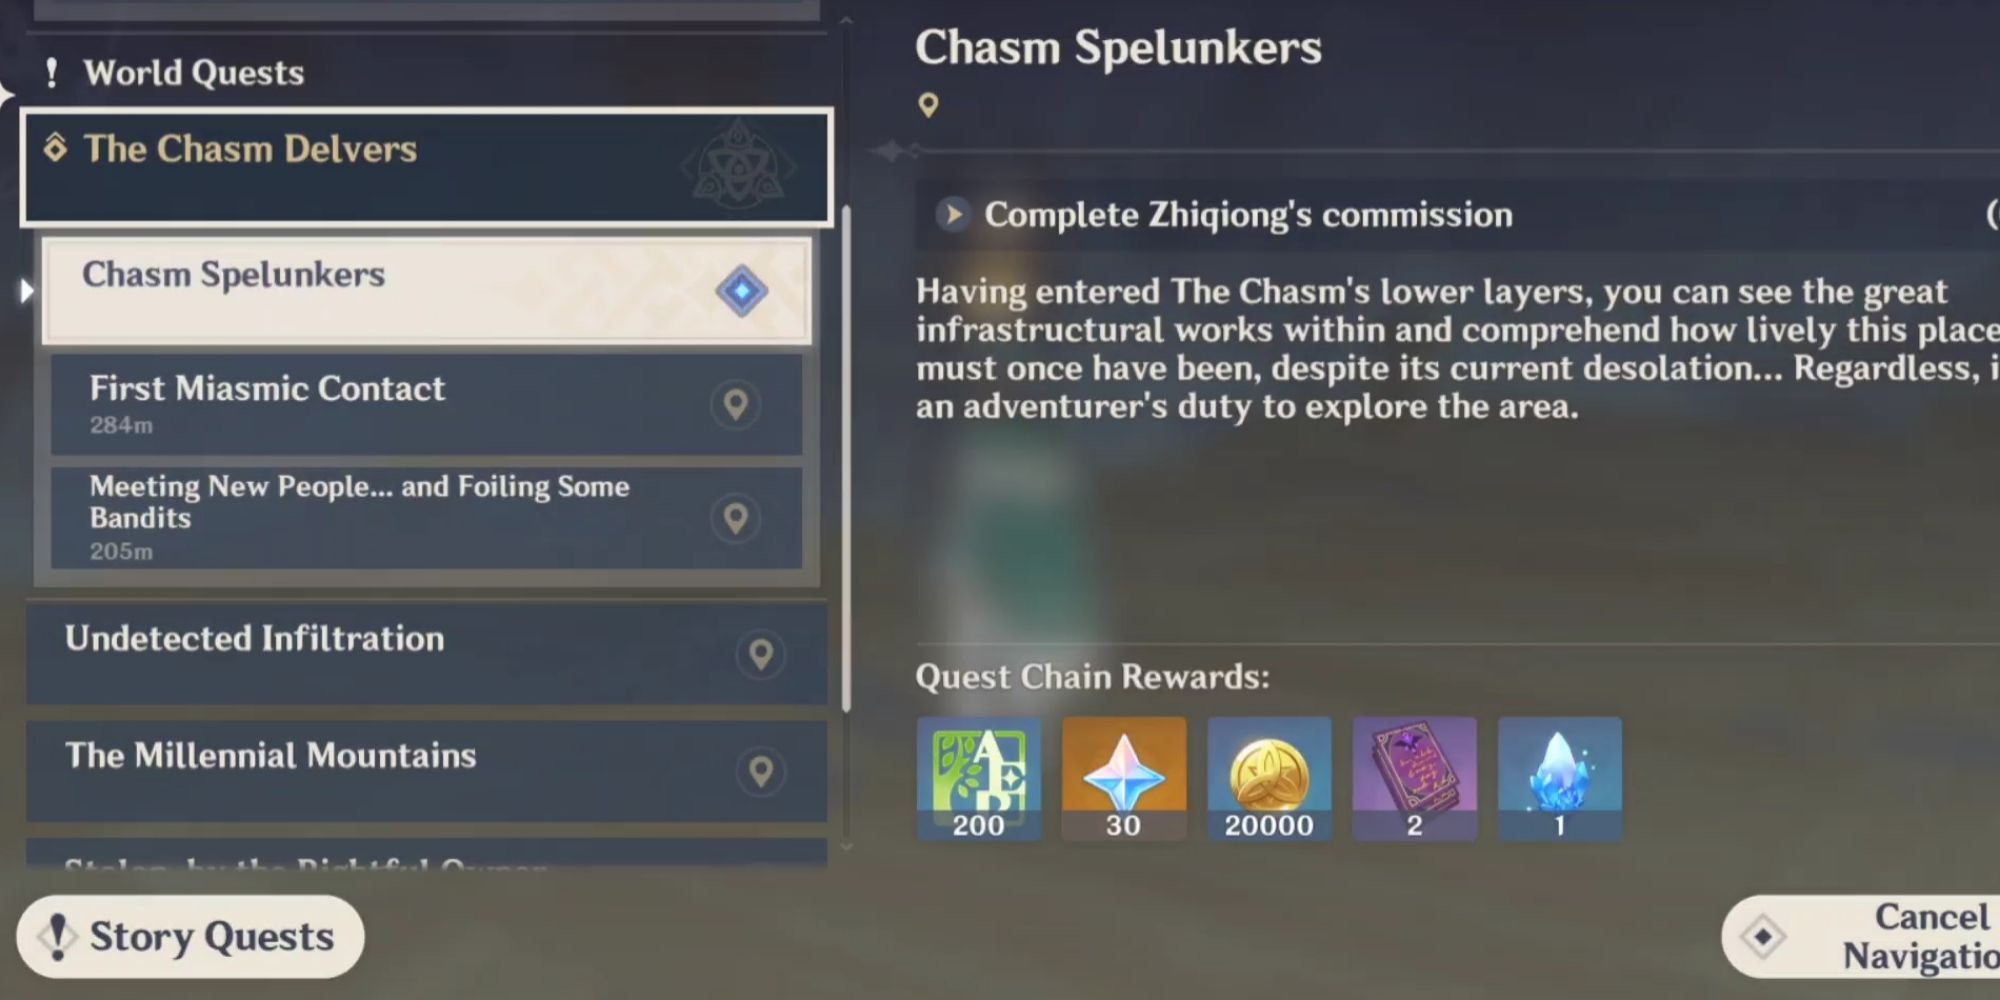 Chasm Spelunkers Quest in Genshin impact